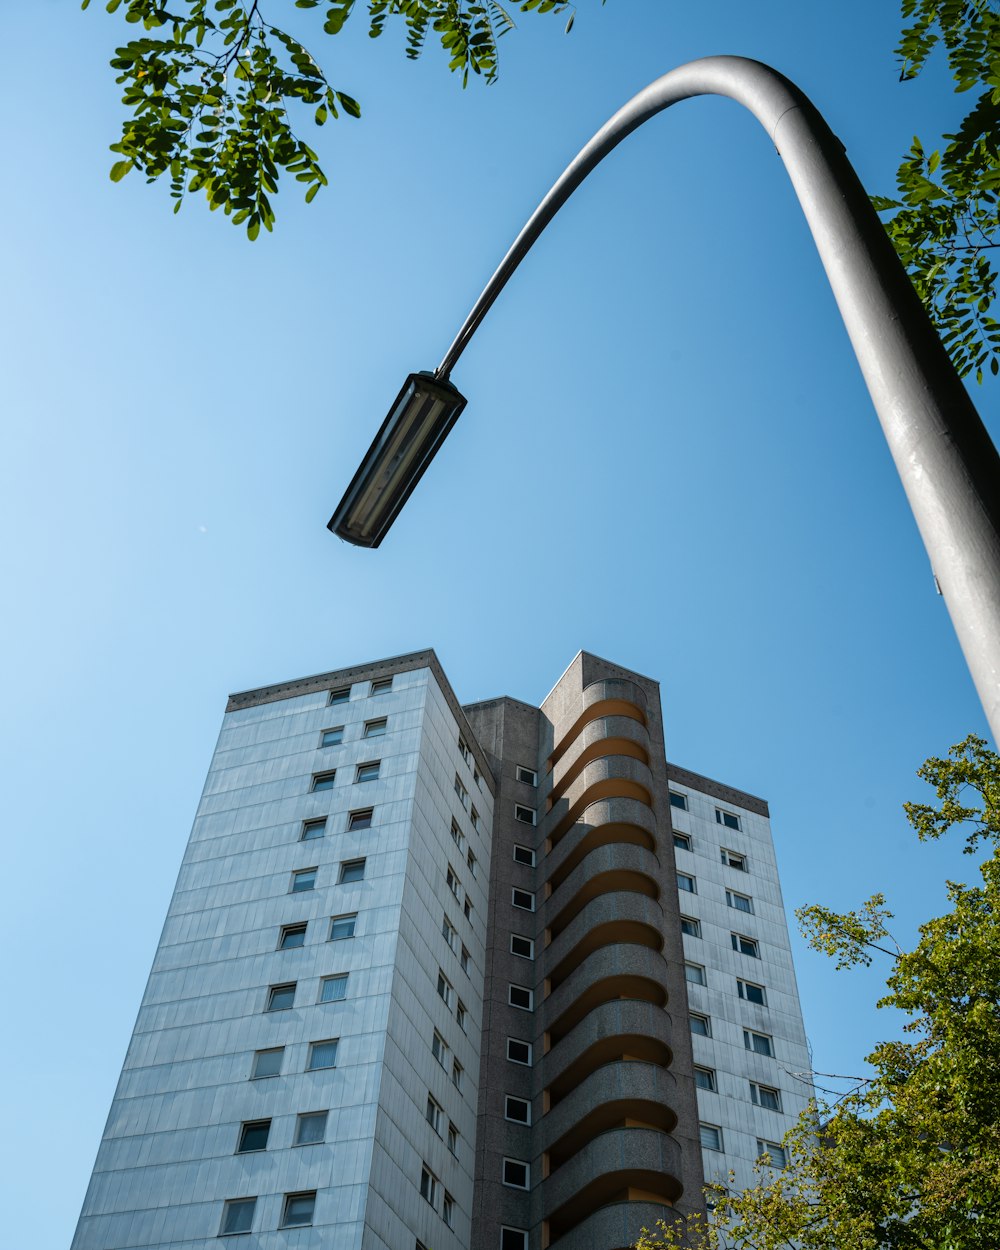 a tall white building sitting next to a street light